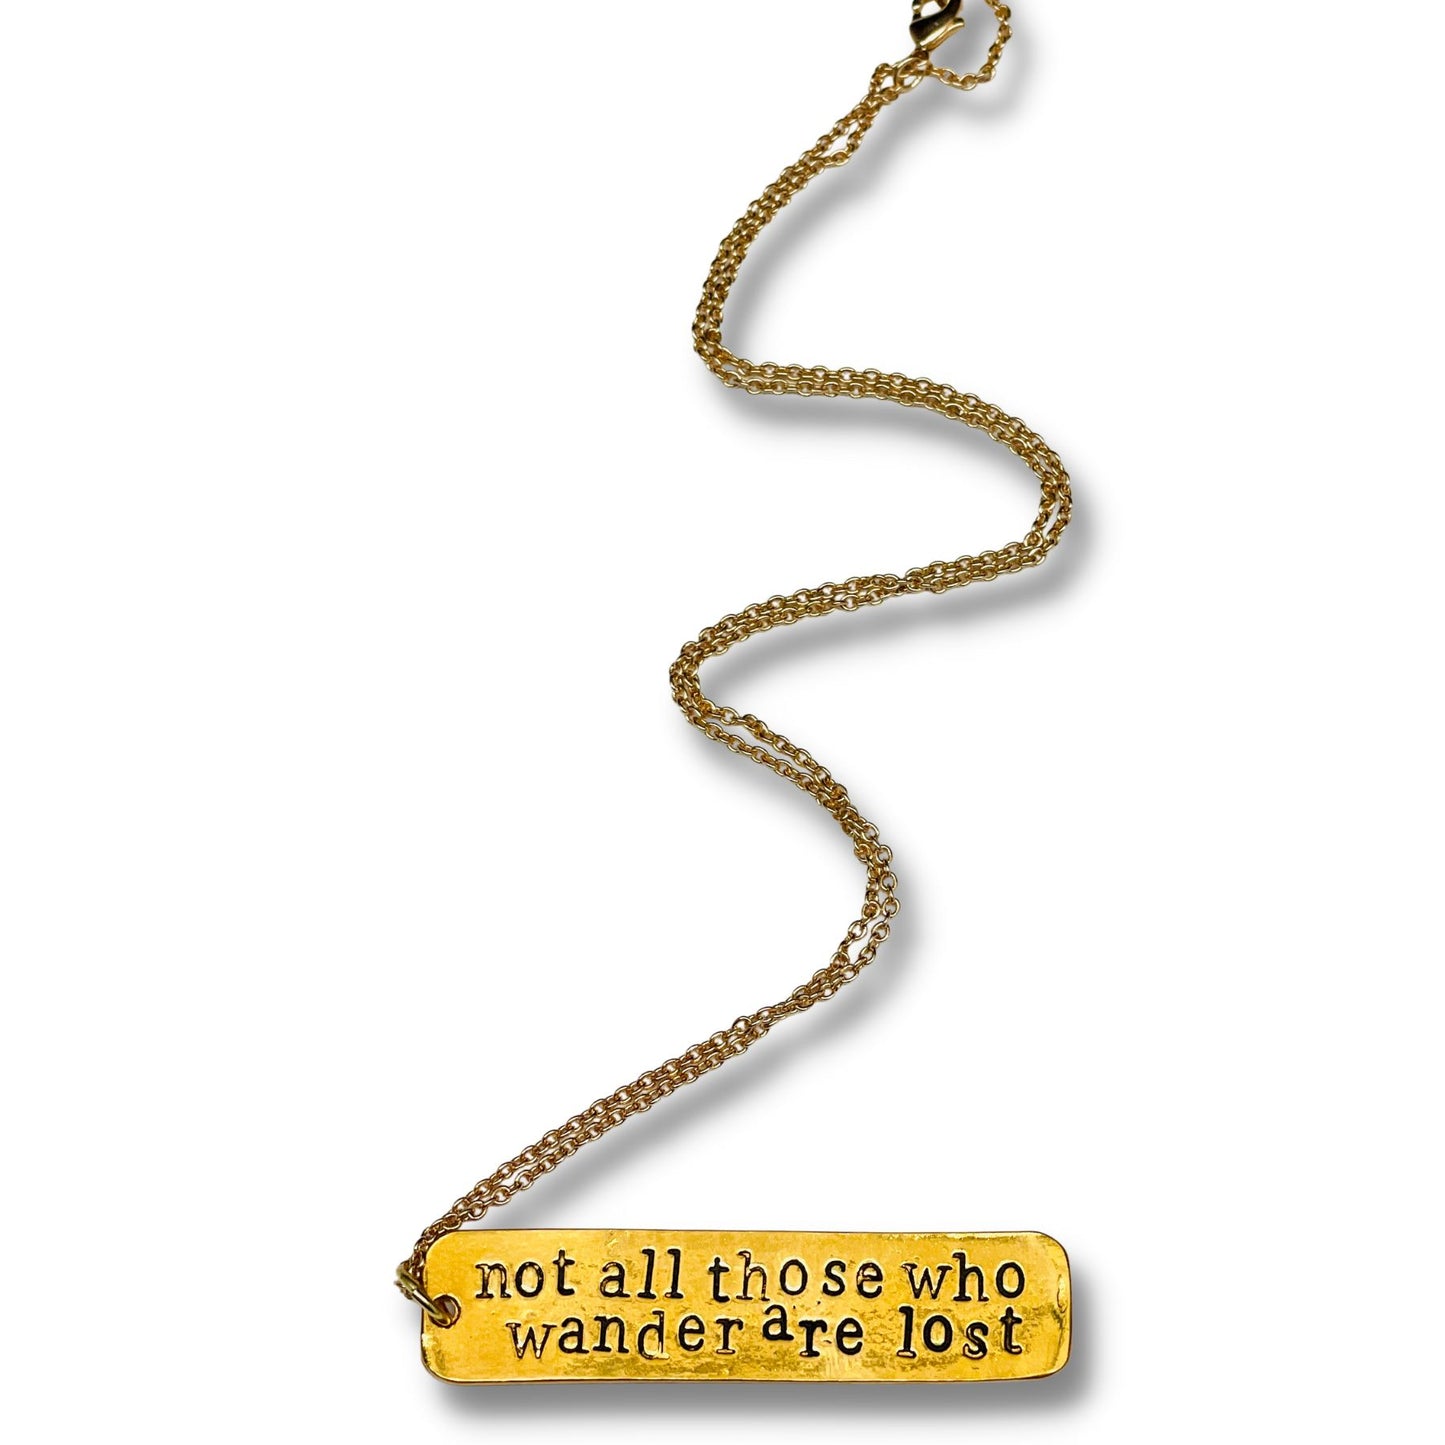 Not All Those Who Wander Are Lost Hand Stamped Pendant Necklace